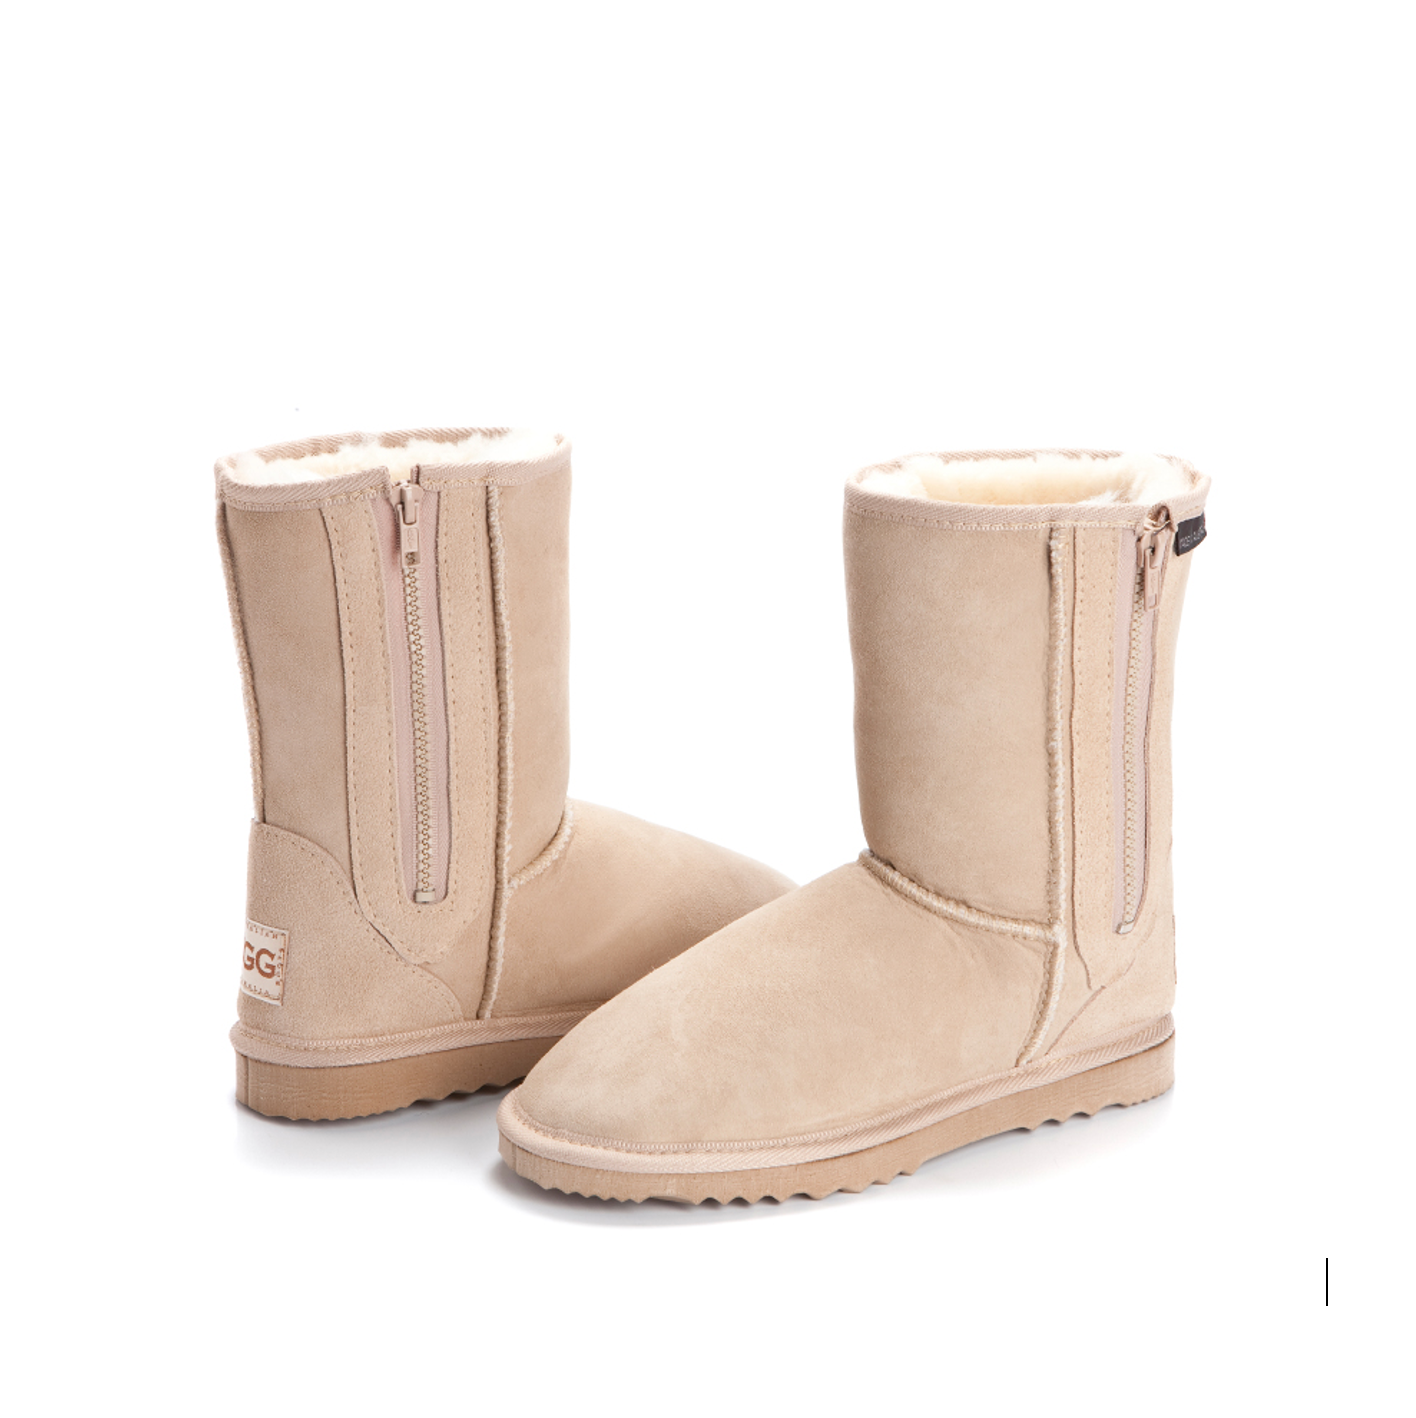 Kid's Breezer Ugg Boots, with a zip in Sand Colour